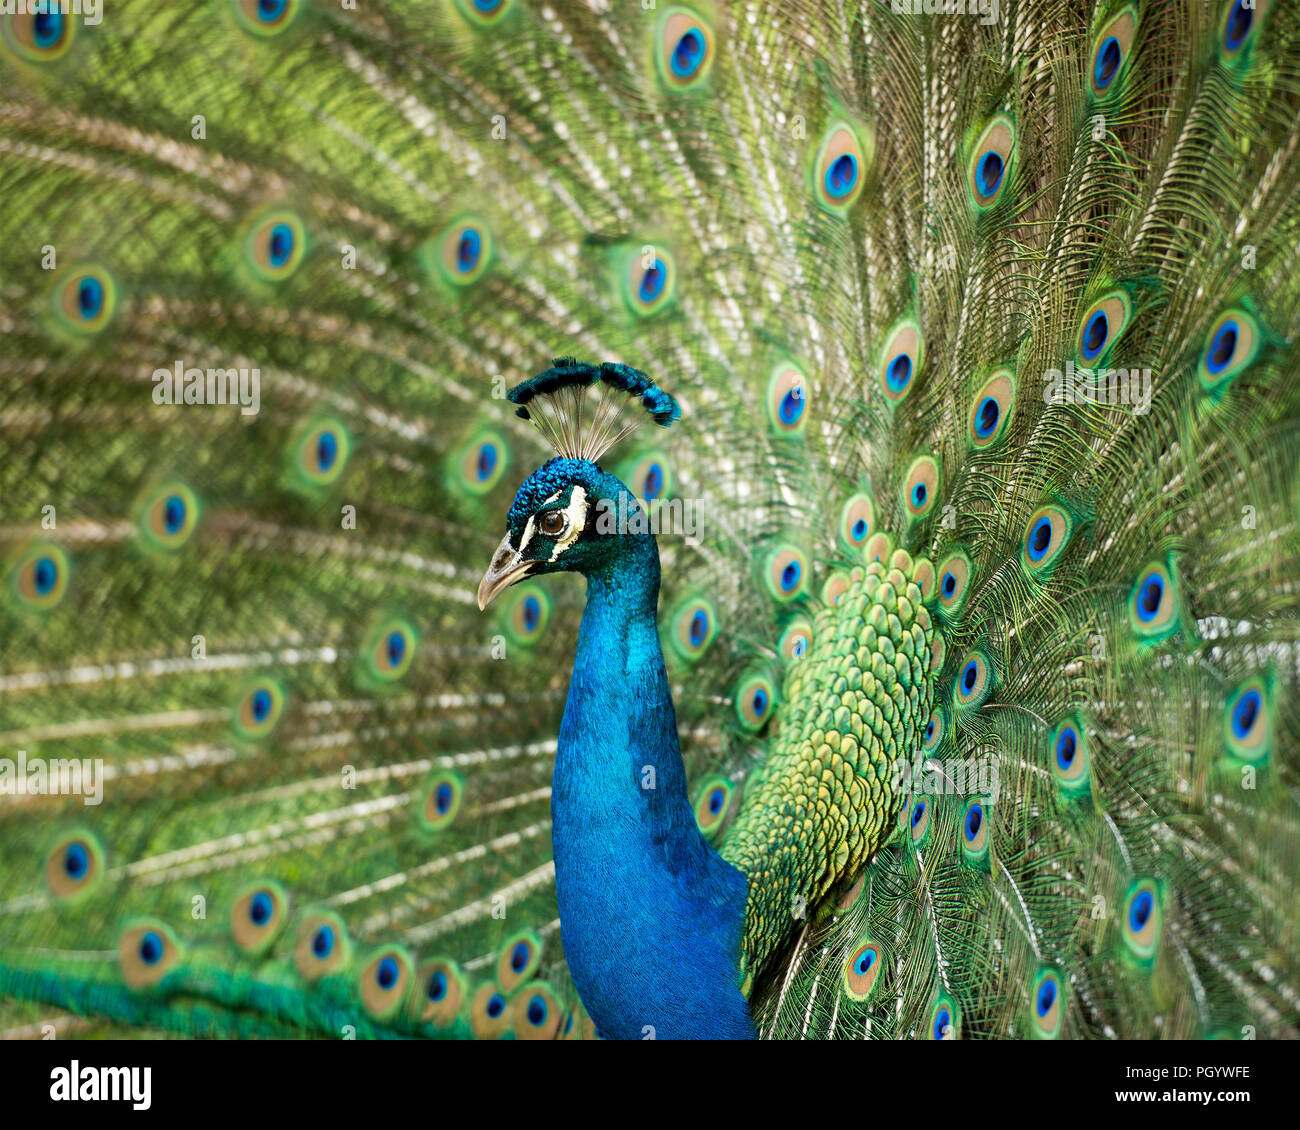 Peacock bird close up displaying its beautiful and colorful blue & green plumage tail with eyespots. Stock Photo